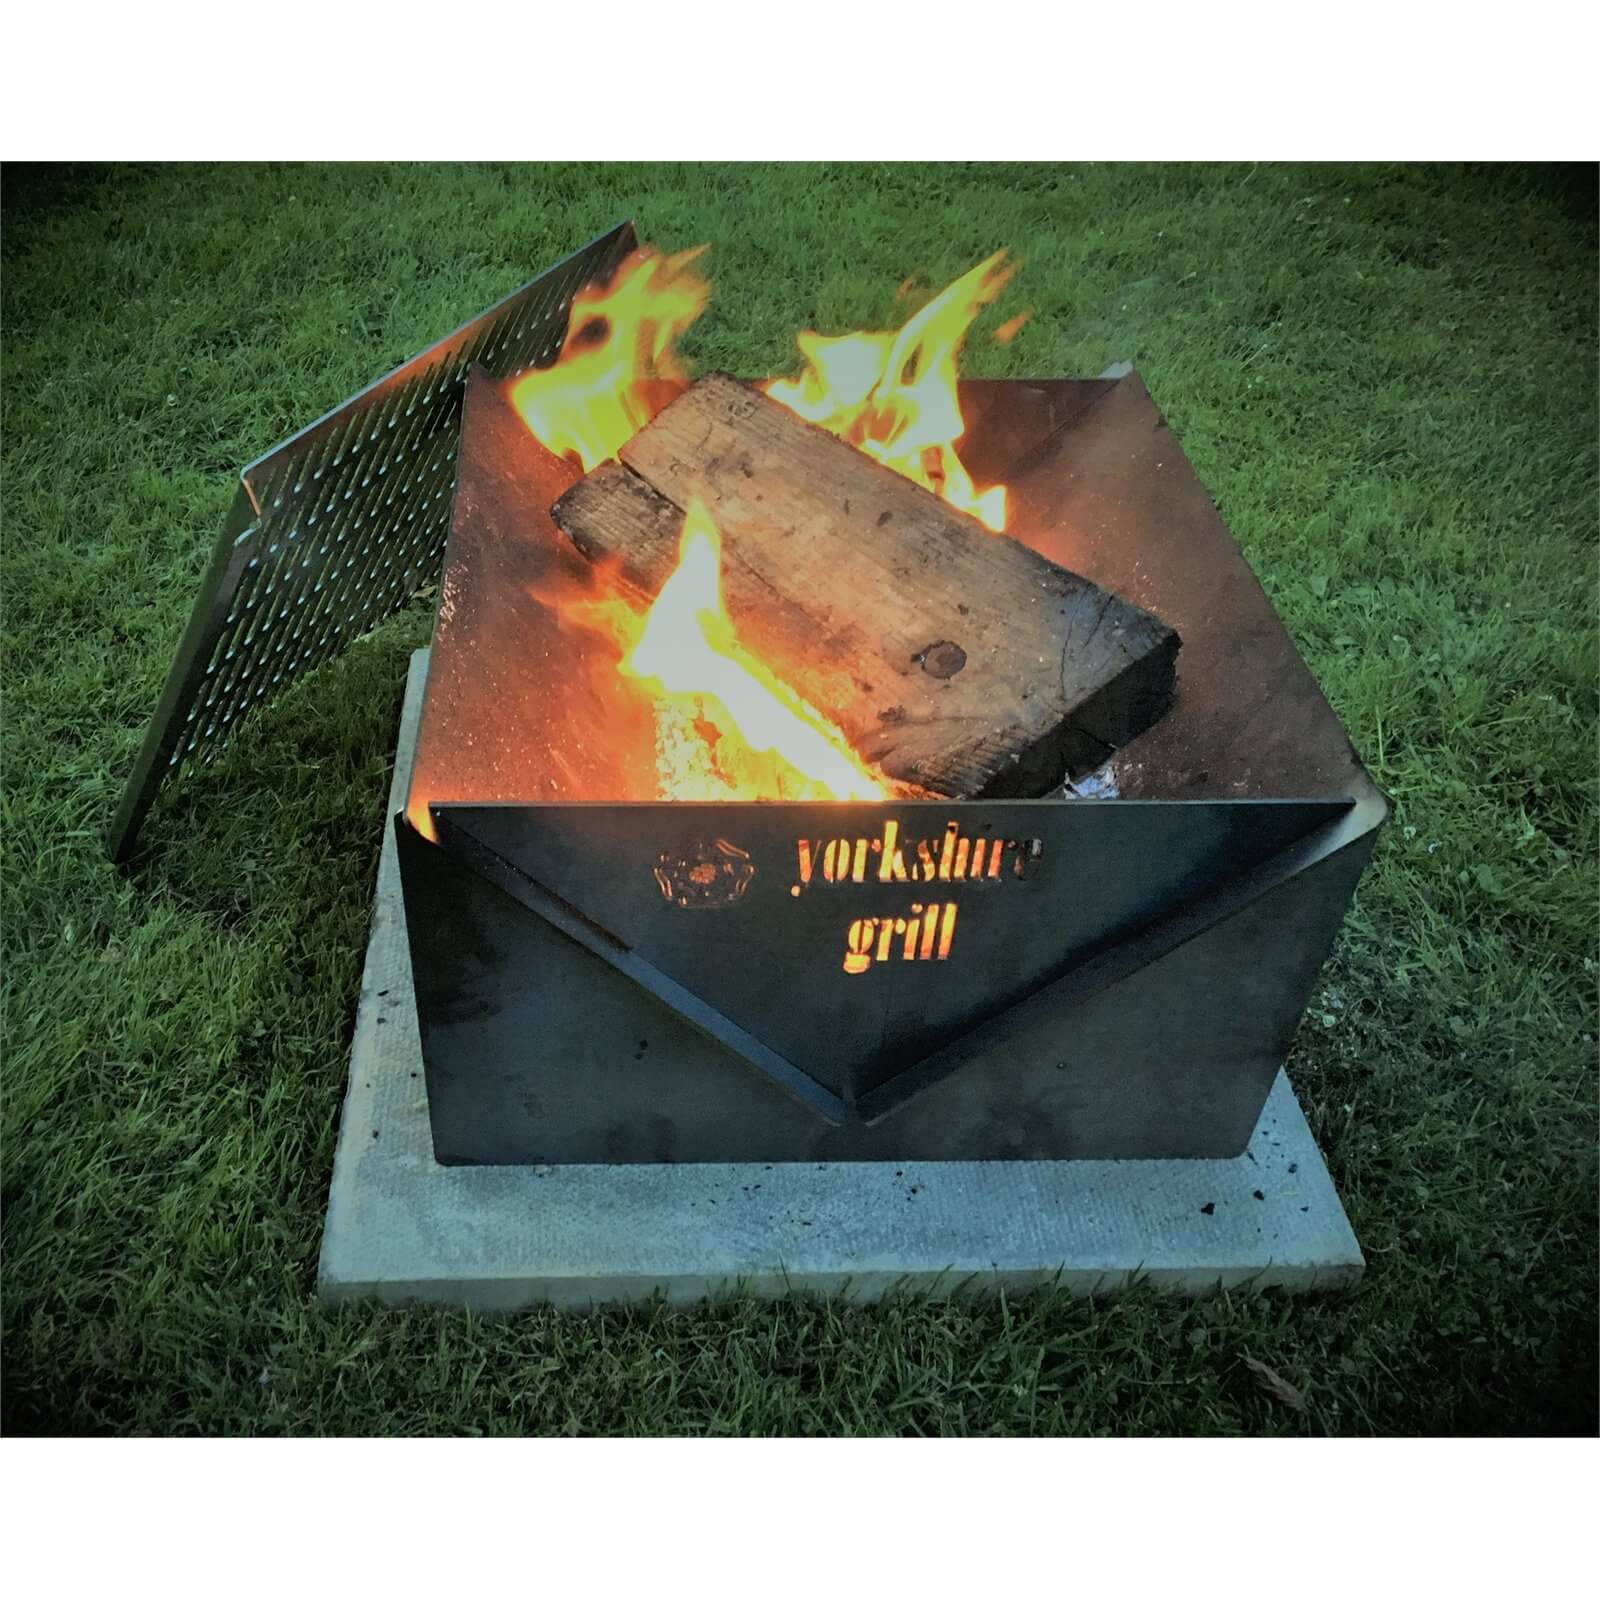 Yorkshire Grill Firepit and BBQ